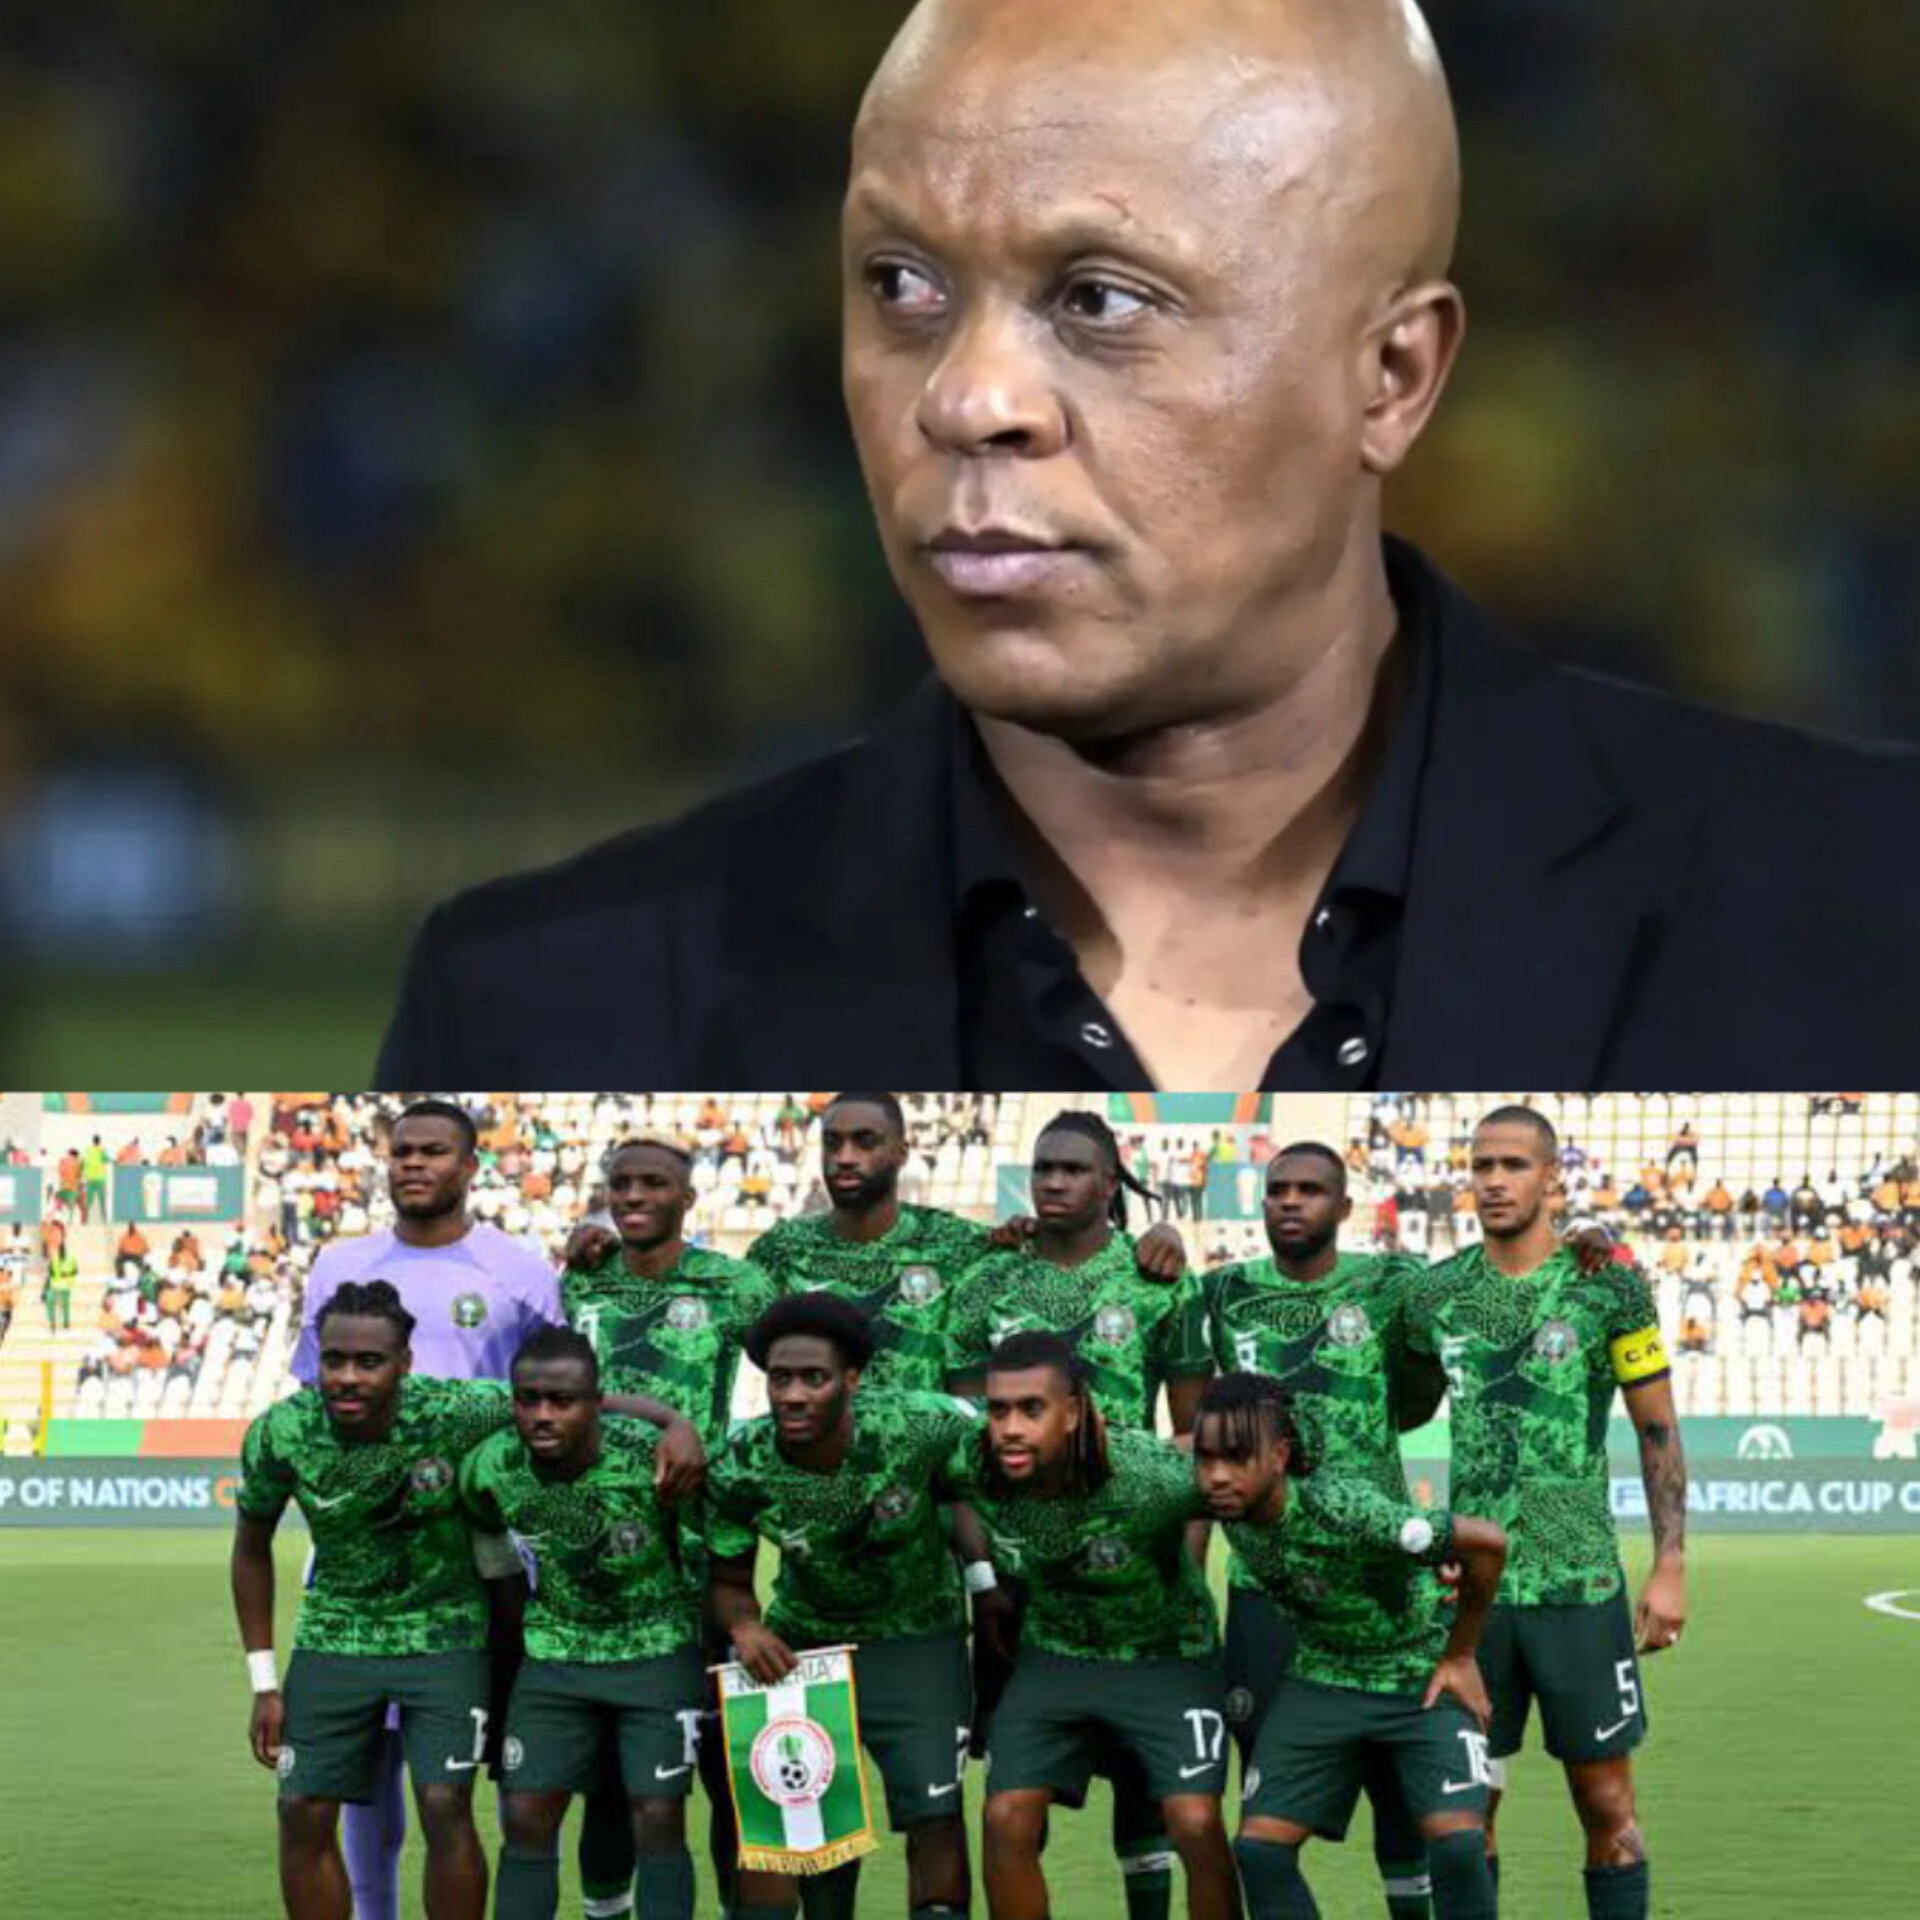 2026 FIFA W/C Qualifiers: I can bet all my money South Africa will overcome Super Eagles – Former SA footballer, Khumalo